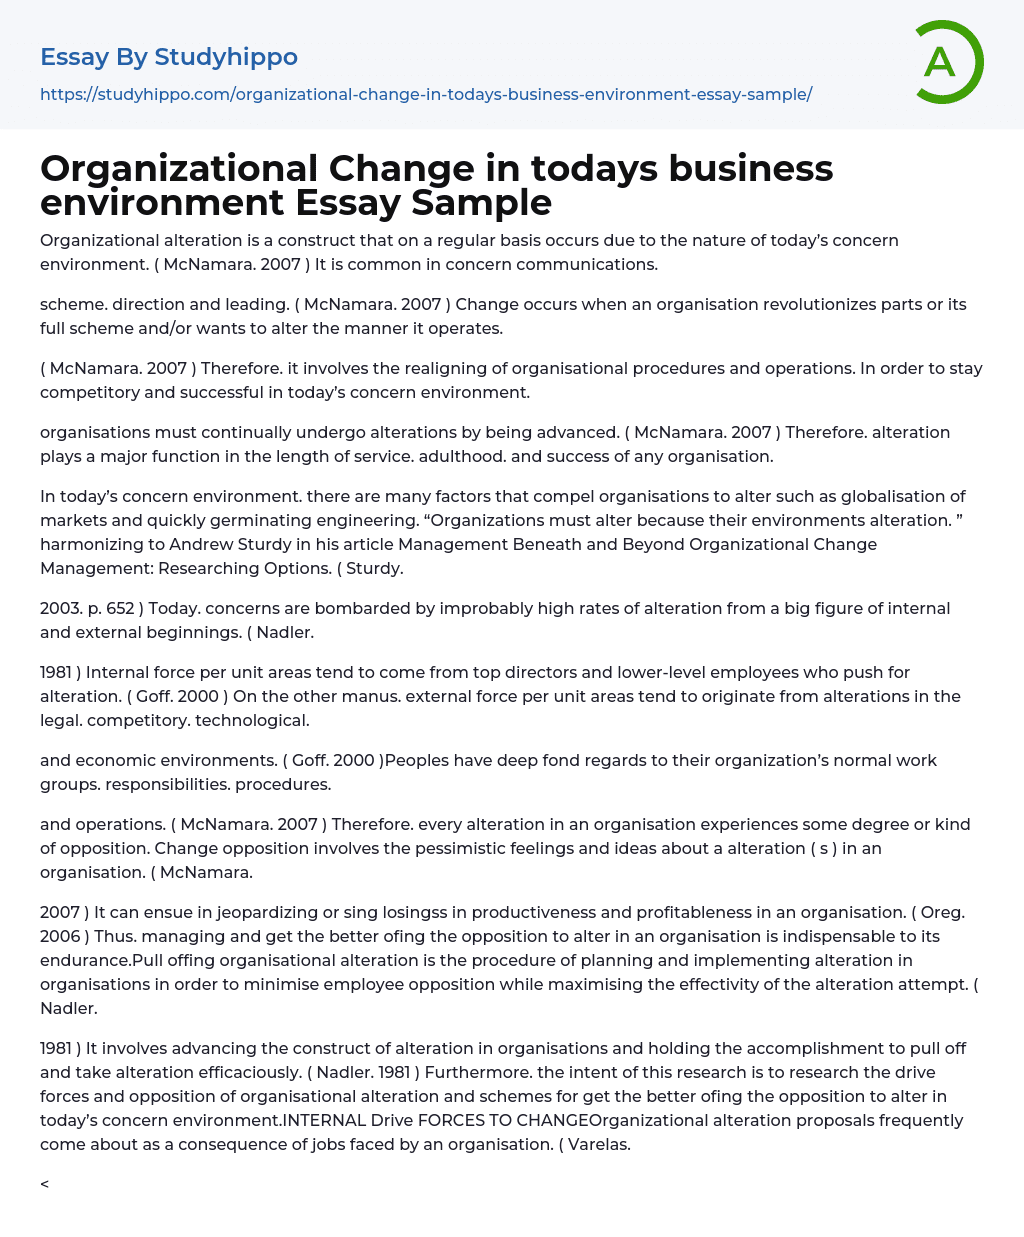 Organizational Change in todays business environment Essay Sample